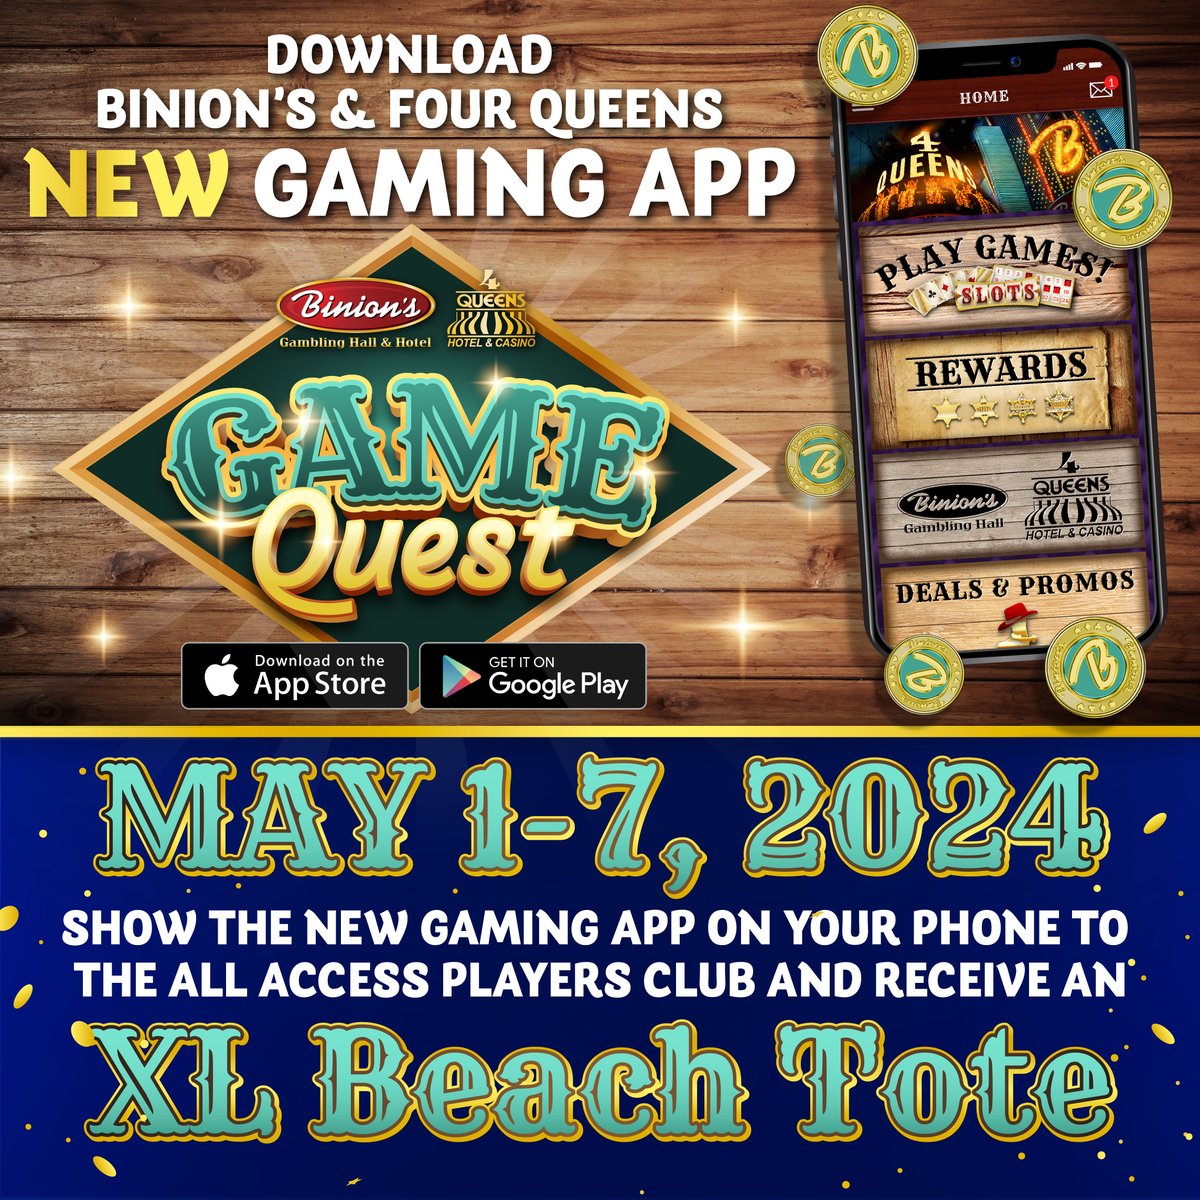 The New Game Quest App is available NOW! 🤠 And as an added bonus, this week if you show your new app at the All Access Players Club you will receive an XL Beach Tote. See All Access Players Club for more information. #FourQueens #Binions